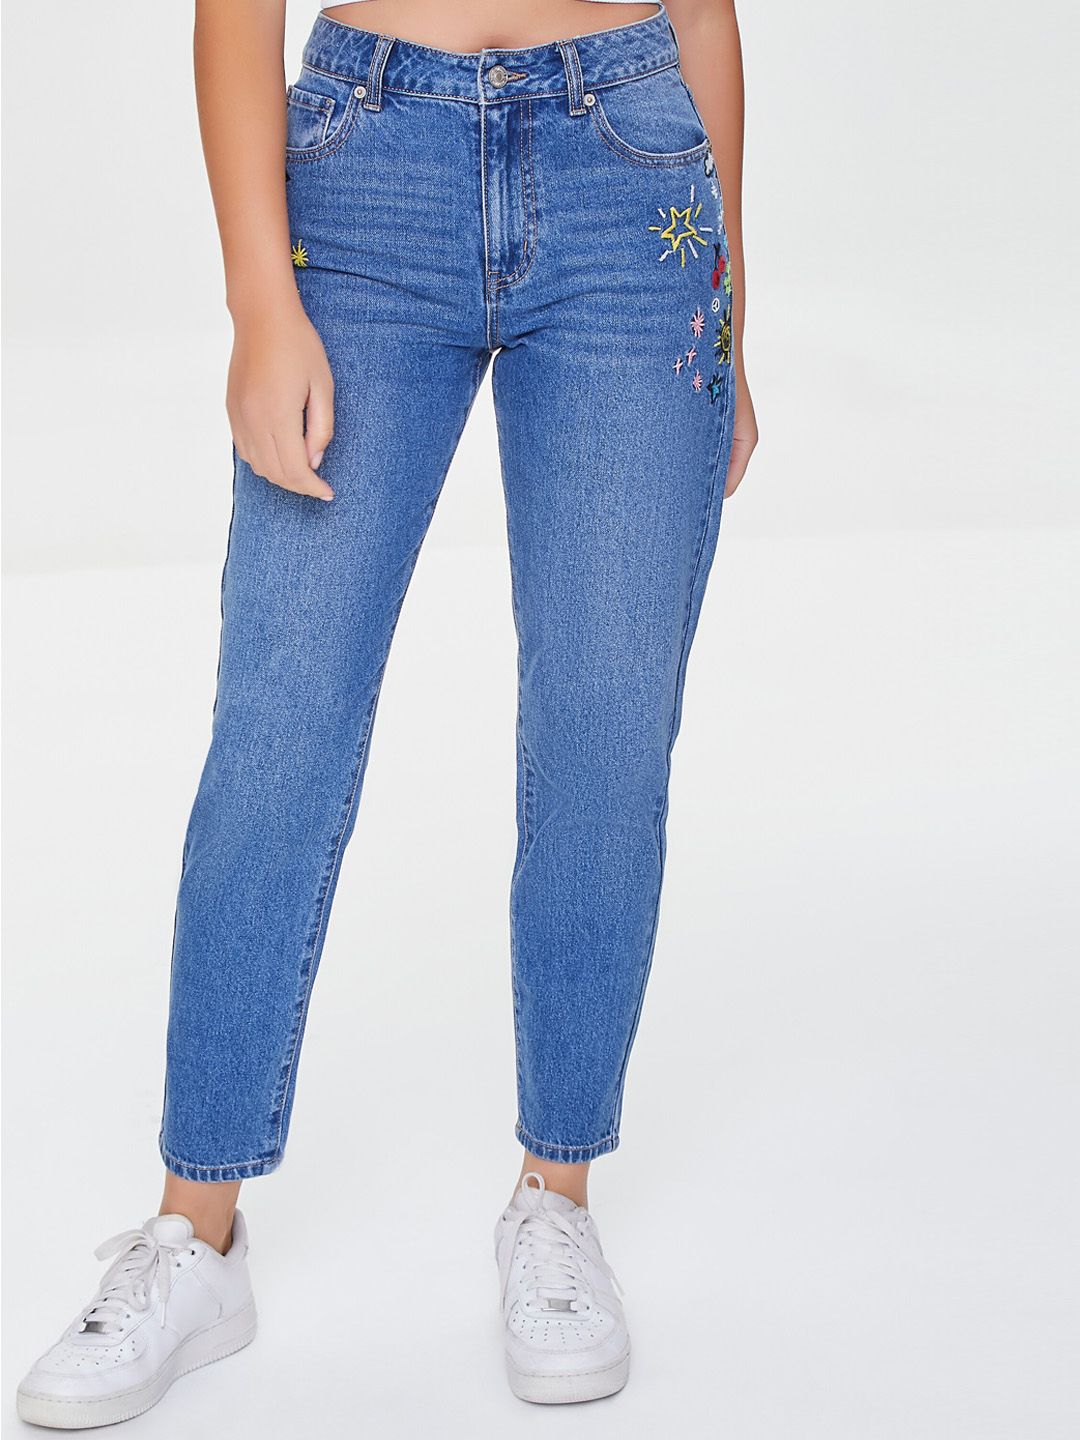 FOREVER 21 Women Blue Embroidered Jeans Price in India